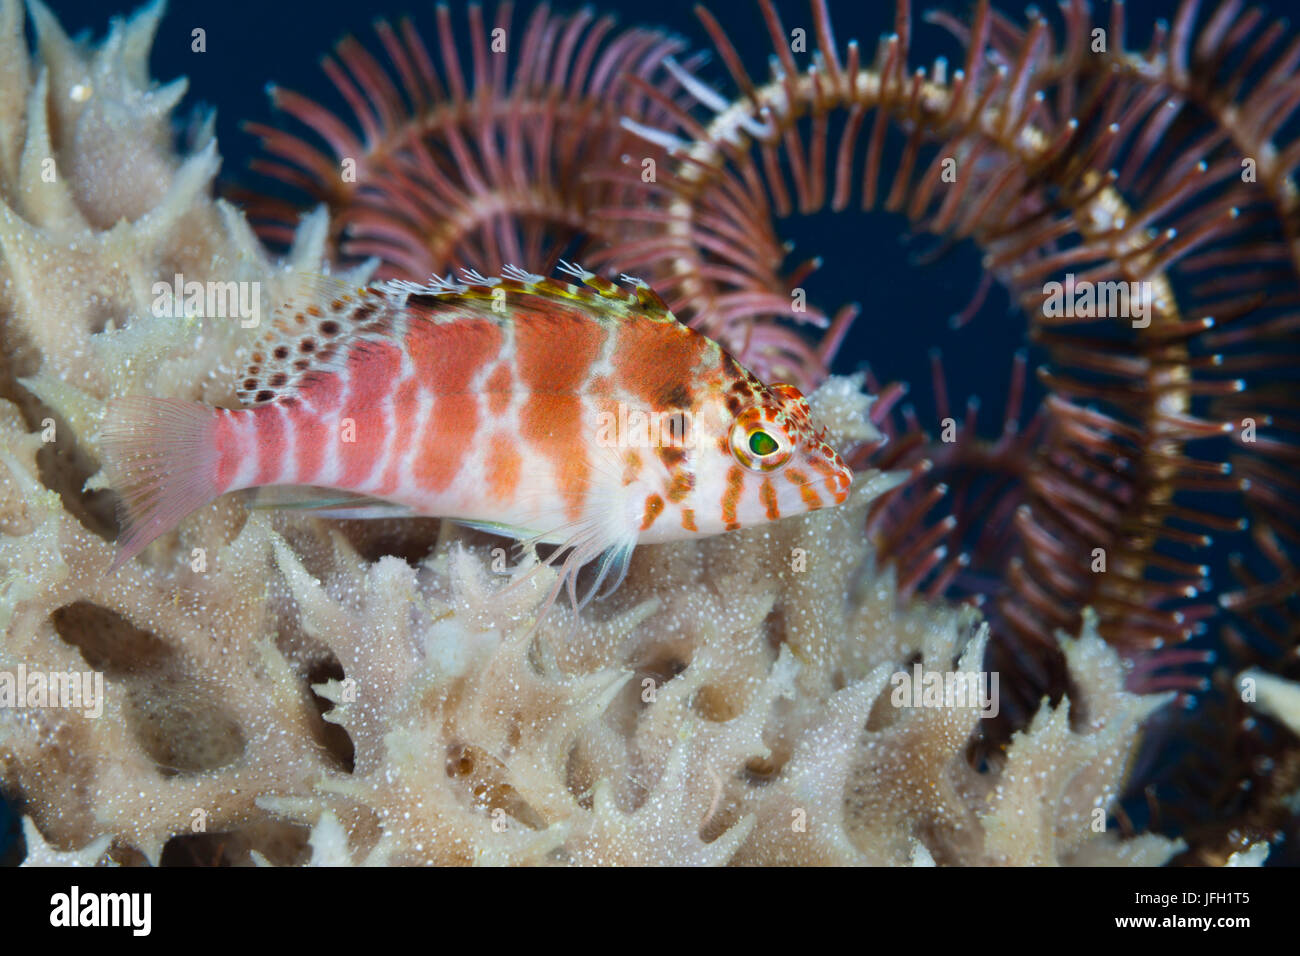 Thread fins coral guard, Cirrhitychthys aprinus, ambon, the Moluccas, Indonesia Stock Photo